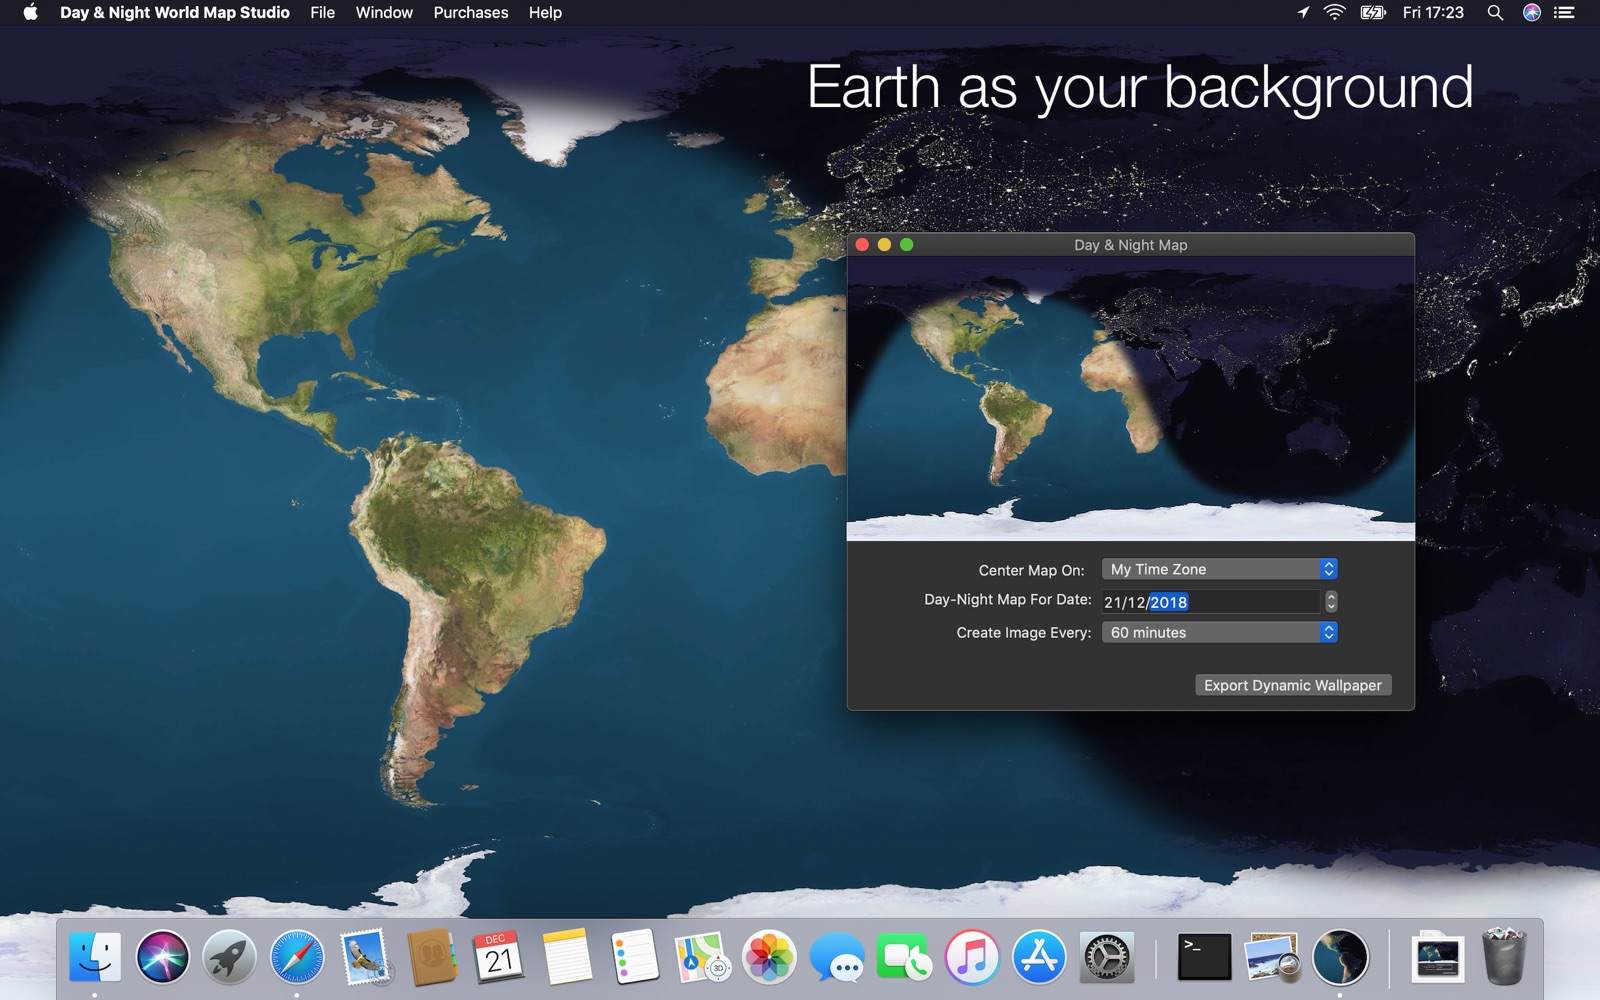 Download free Day & Night World Map Studio for macOS